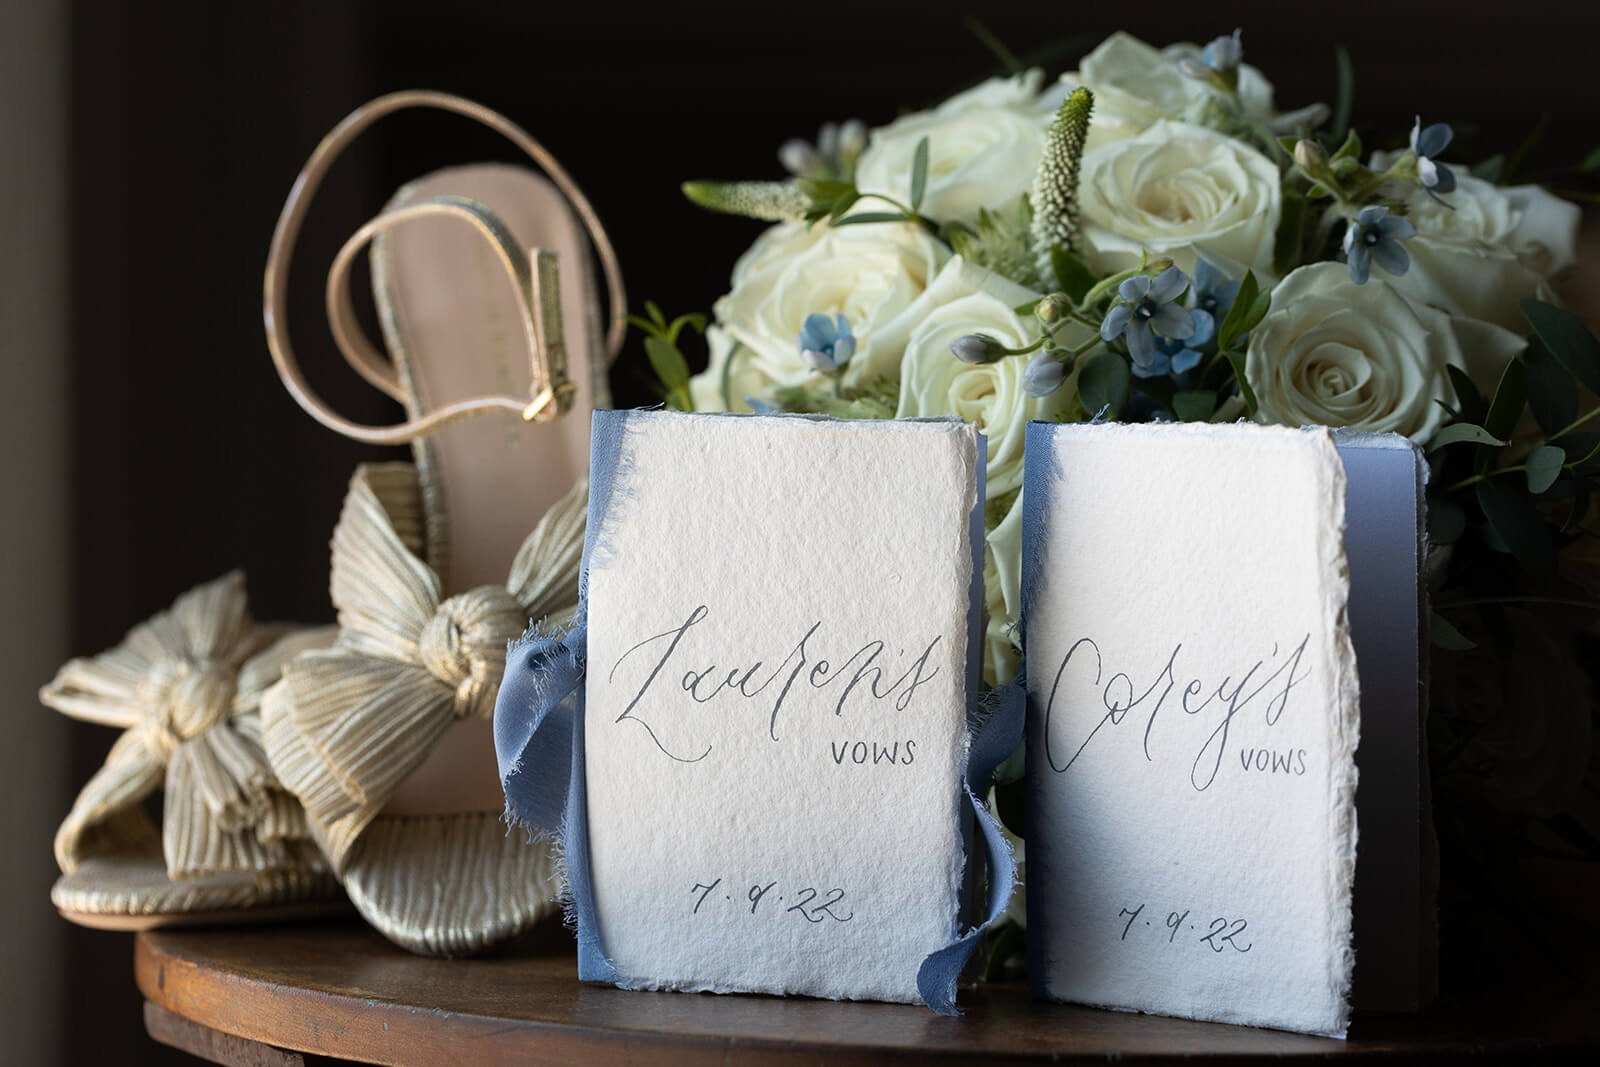 Handmade vow books with blue ribbon and a pair of Loeffler Randall heels